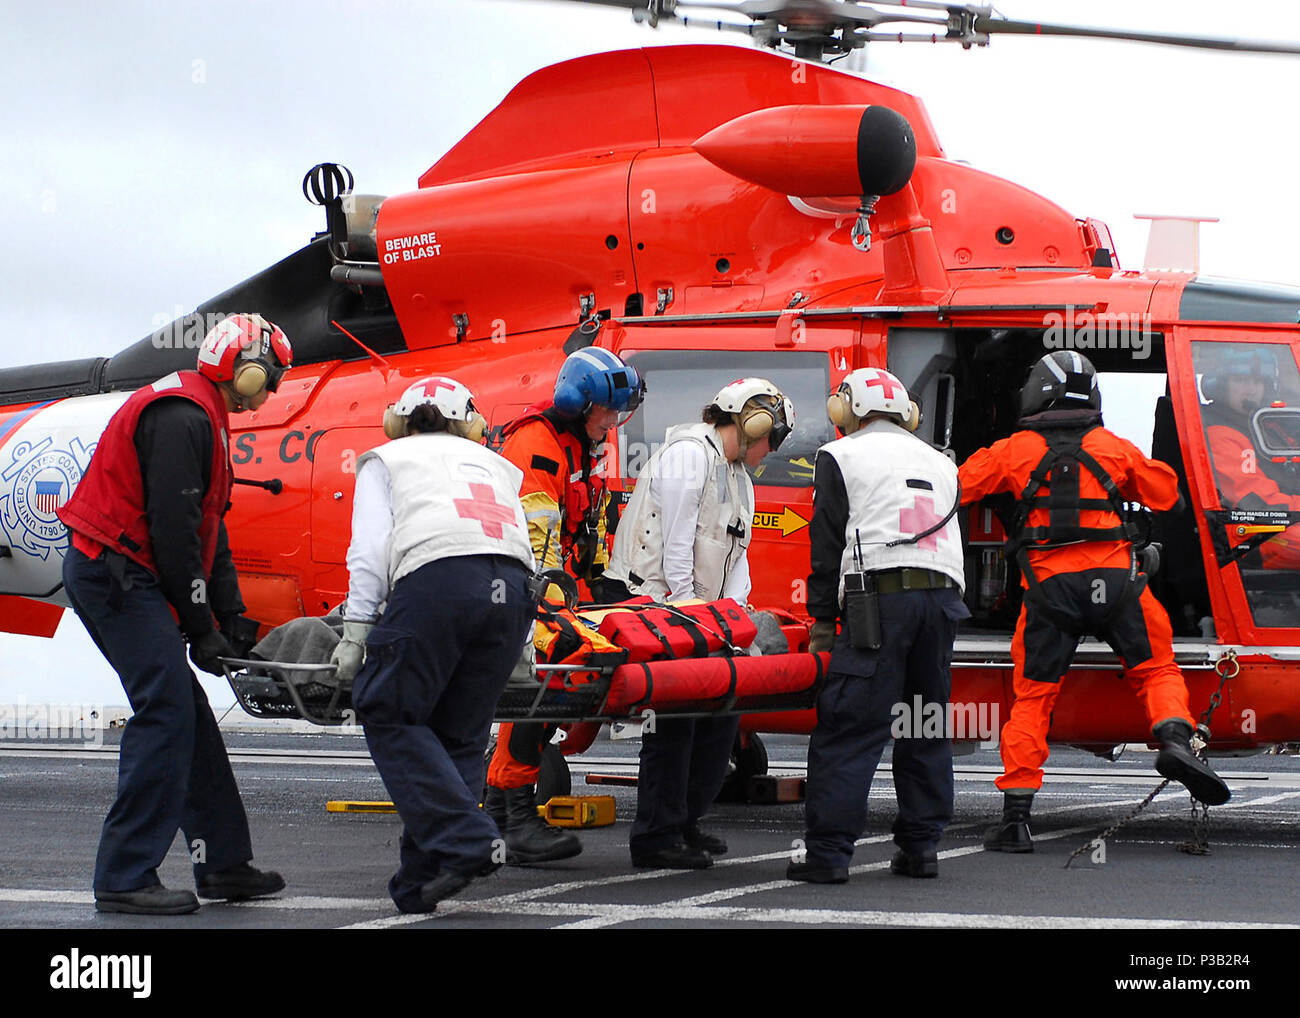 OCEAN (Dec. 14, 2008) An injured merchant sailor from the Liberian cargo ship 'Marie Rickmers' is loaded onto a Coast Guard MH-65 Dolphin helicopter after receiving basic medical attention aboard the aircraft carrier USS Abraham Lincoln (CVN 72). The Sailor was taken to Abraham Lincoln the previous night by a San Diego Coast Guard helicopter and medically stabilized before being flown to San Francisco for treatment. Abraham Lincoln is underway conducting training and carrier qualifications. Stock Photo